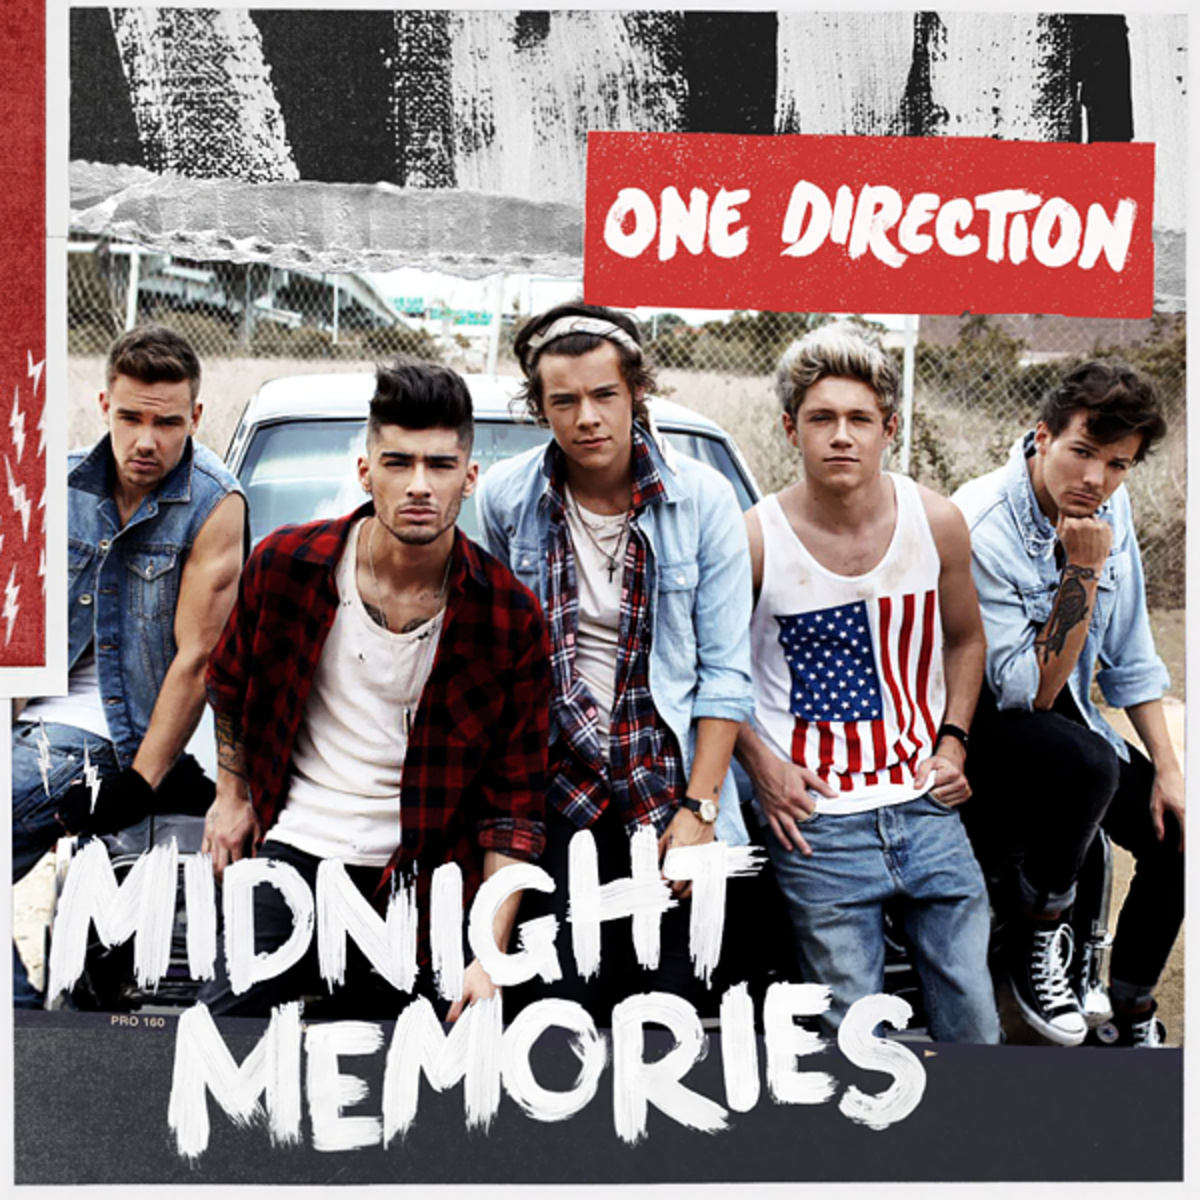 Best Albums Ever In The Whole World Torrents: One Direction - Midnight